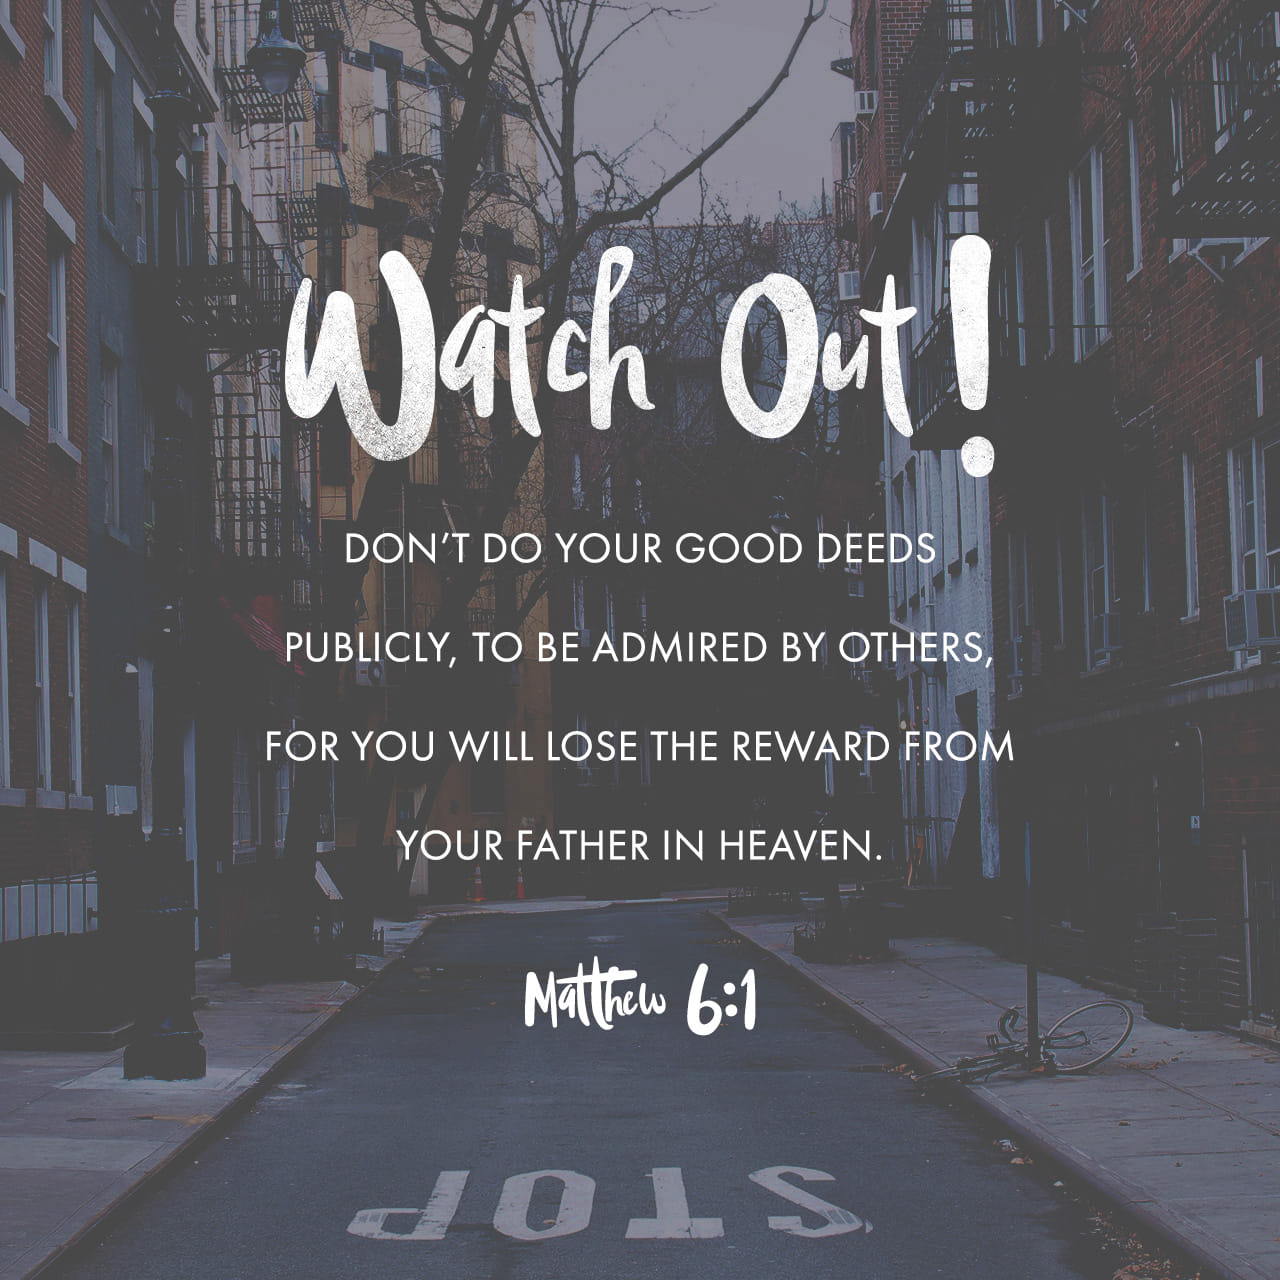 Matthew 6:1-4 “Examine your motives to make sure you’re not showing off ...